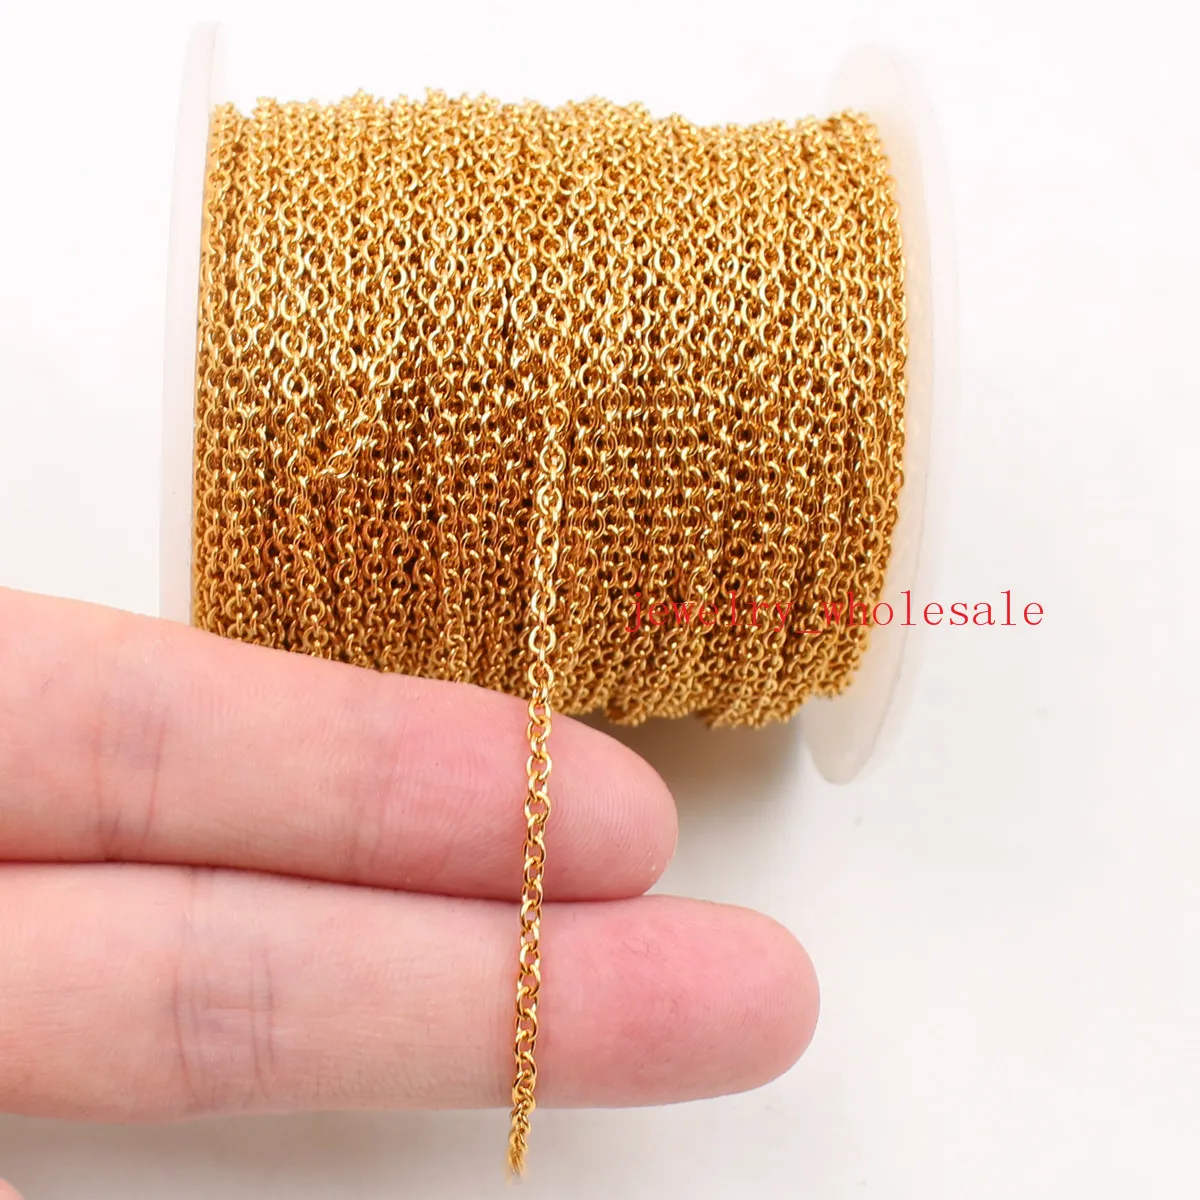 Wholesale Bulk Jewelry Finding Chain 10m Gold Stainless Steel Smooth Link  Rolo Chain For Jewelers 1.5mm/1.8mm Thickness From Charmspendant, $12.5